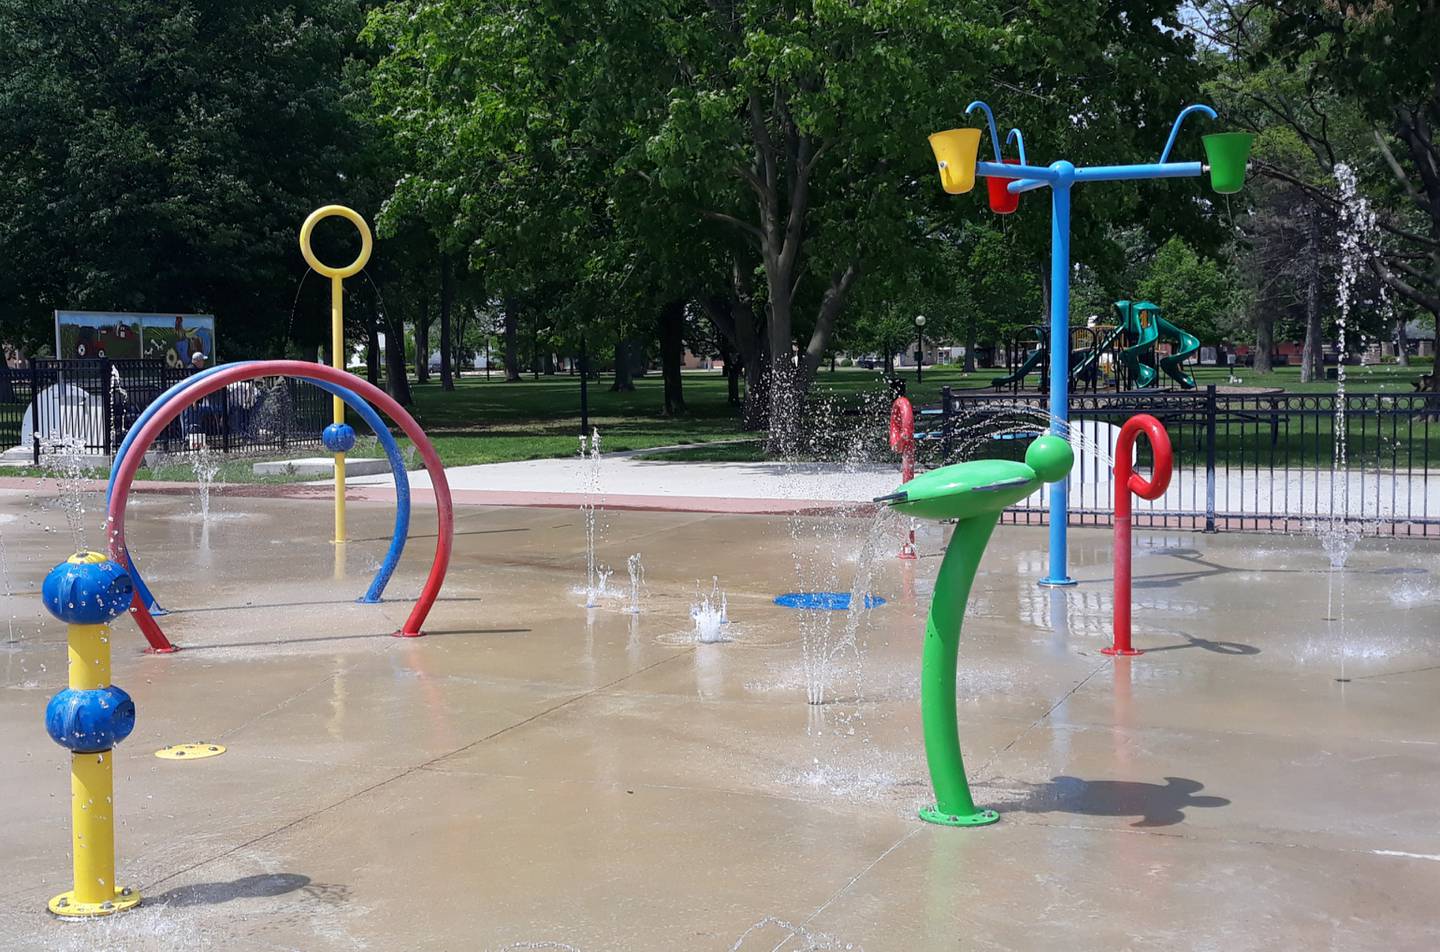 Streator city staff tested the water Tuesday, May 24, at Paul's Pad in City Park. The splash pad is expected to be turned on during Memorial Day weekend to coincide with Park Fest.